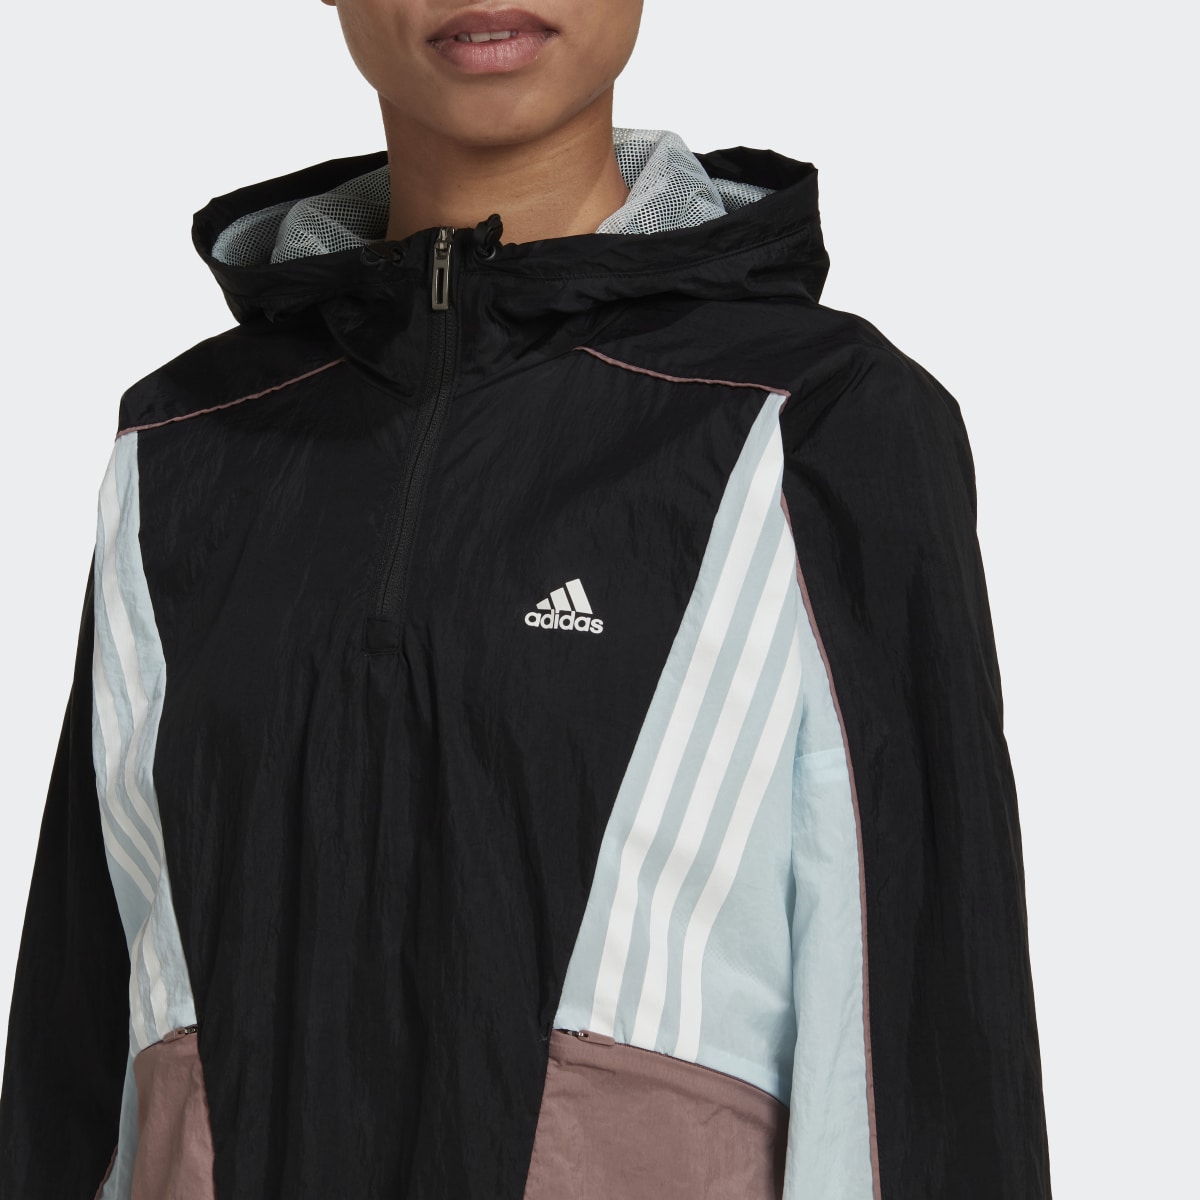 Adidas Hyperglam Hooded Track Top. 6